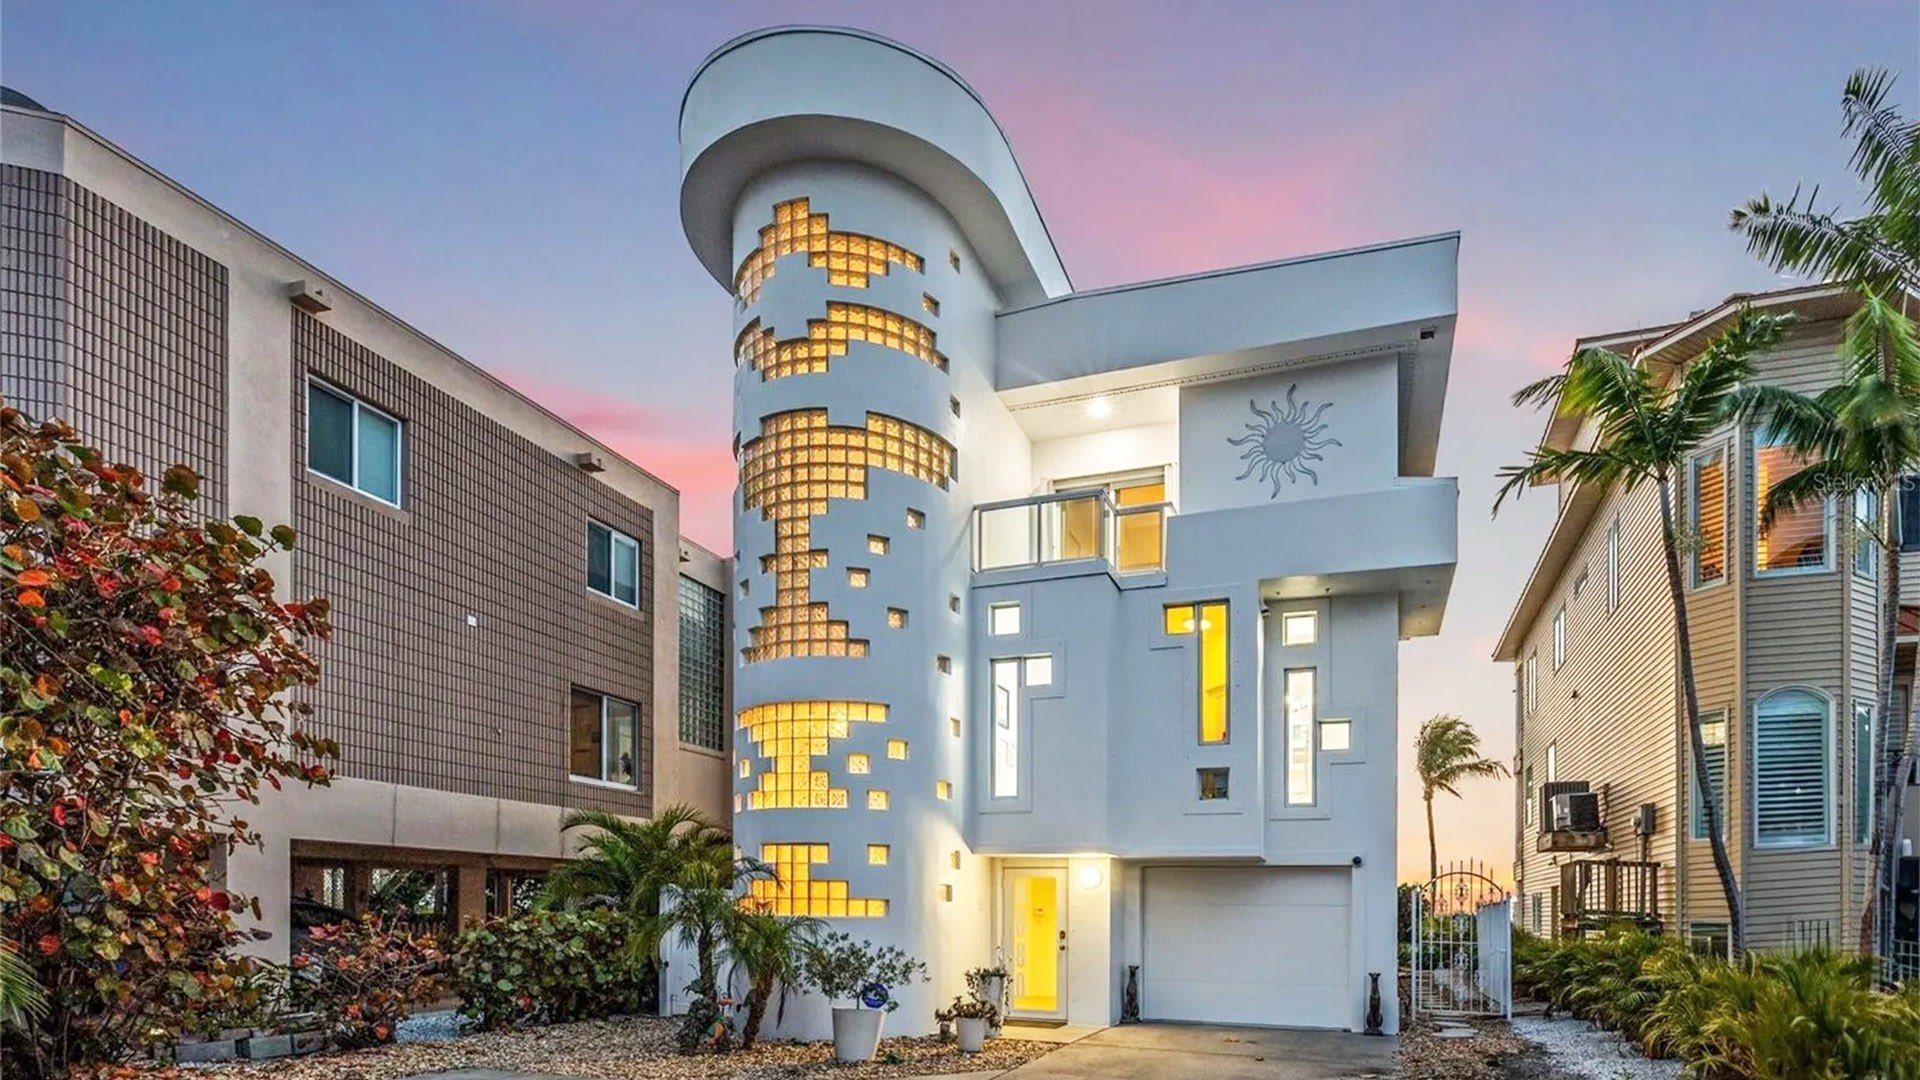 Let’s Be Sure: Glass Block House in Florida Is a Colorful Satisfaction for $3.8M